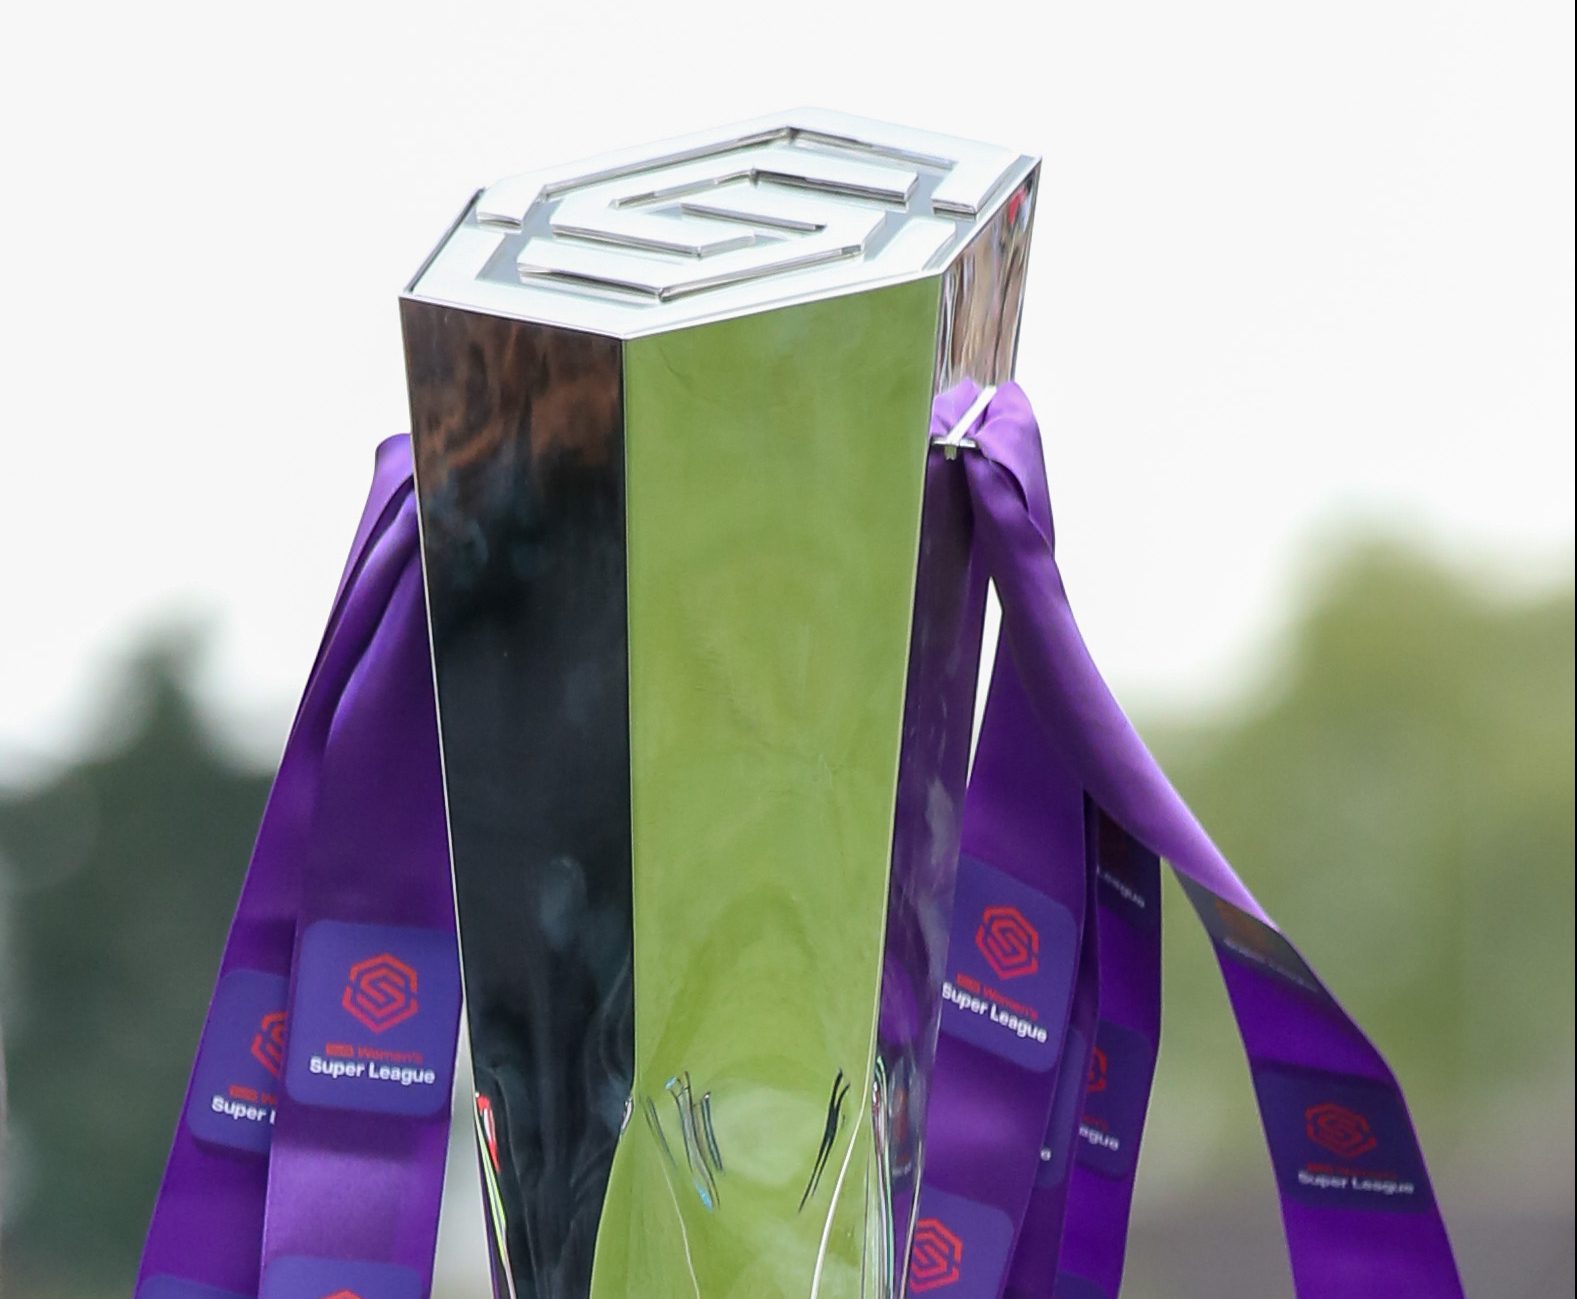 The WSL trophy